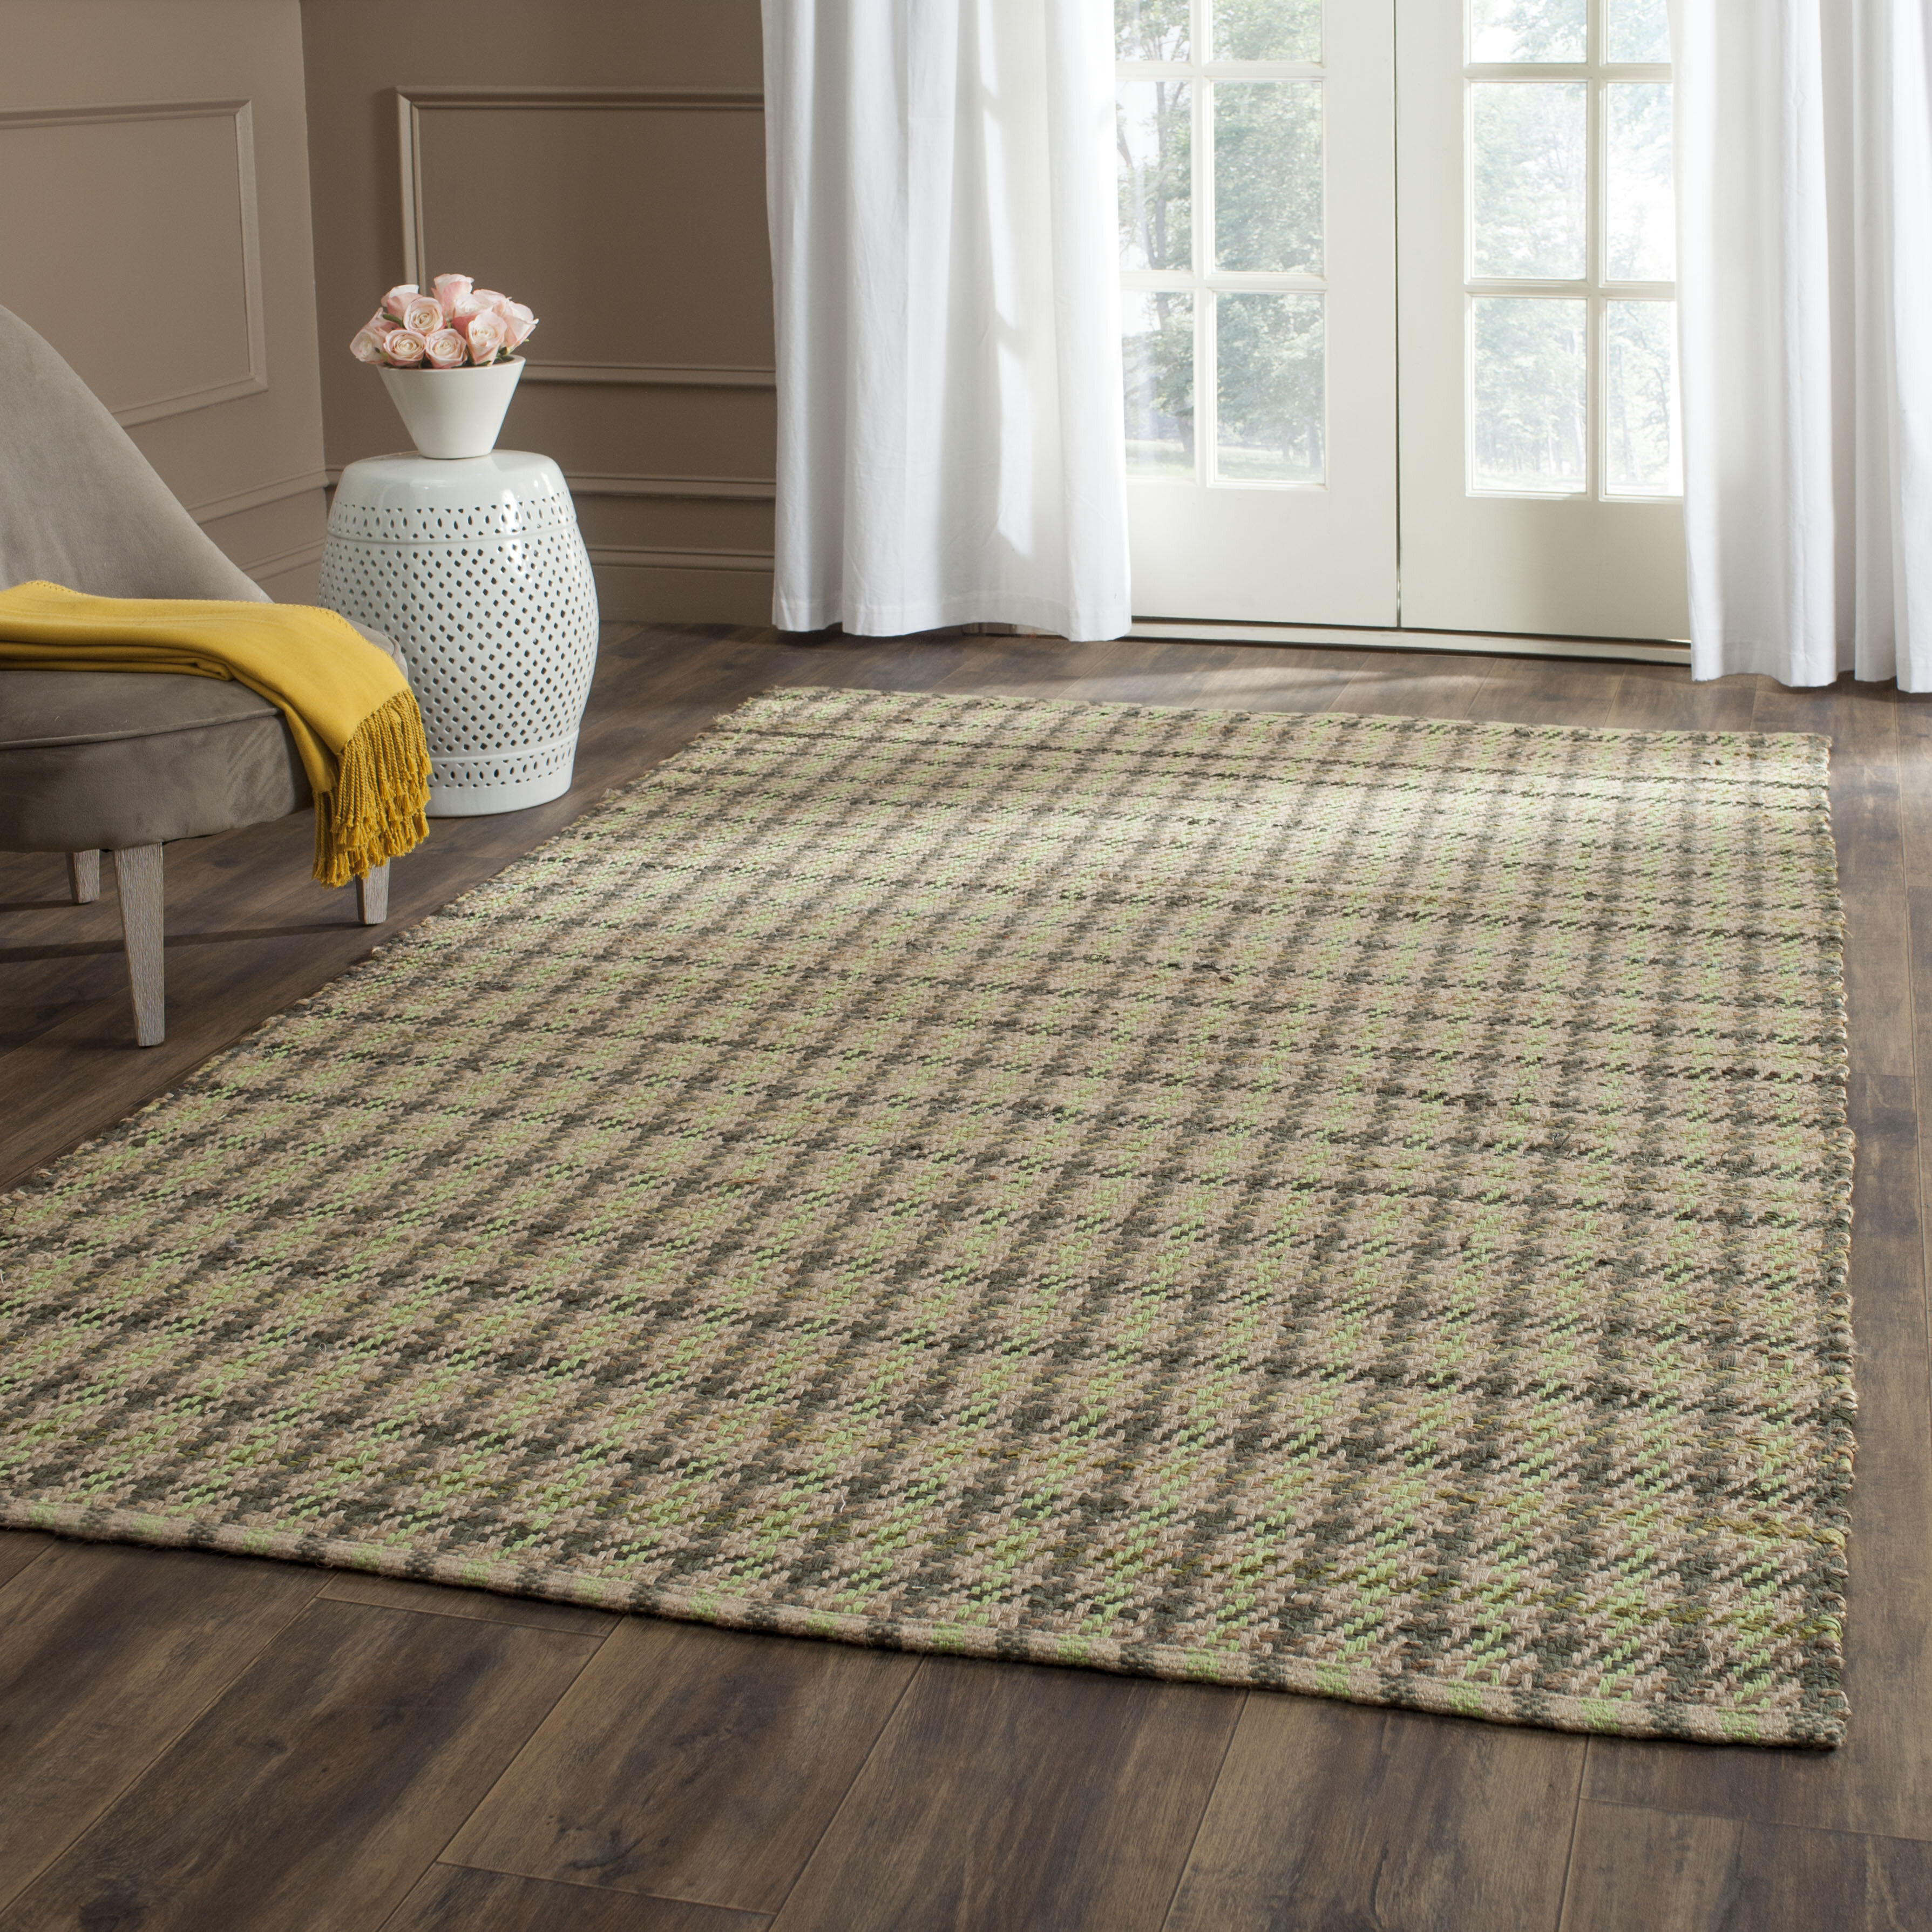 Natural Living Seagrass Woven Texture Rug in 3 Colours in Various Sizes Carpet 